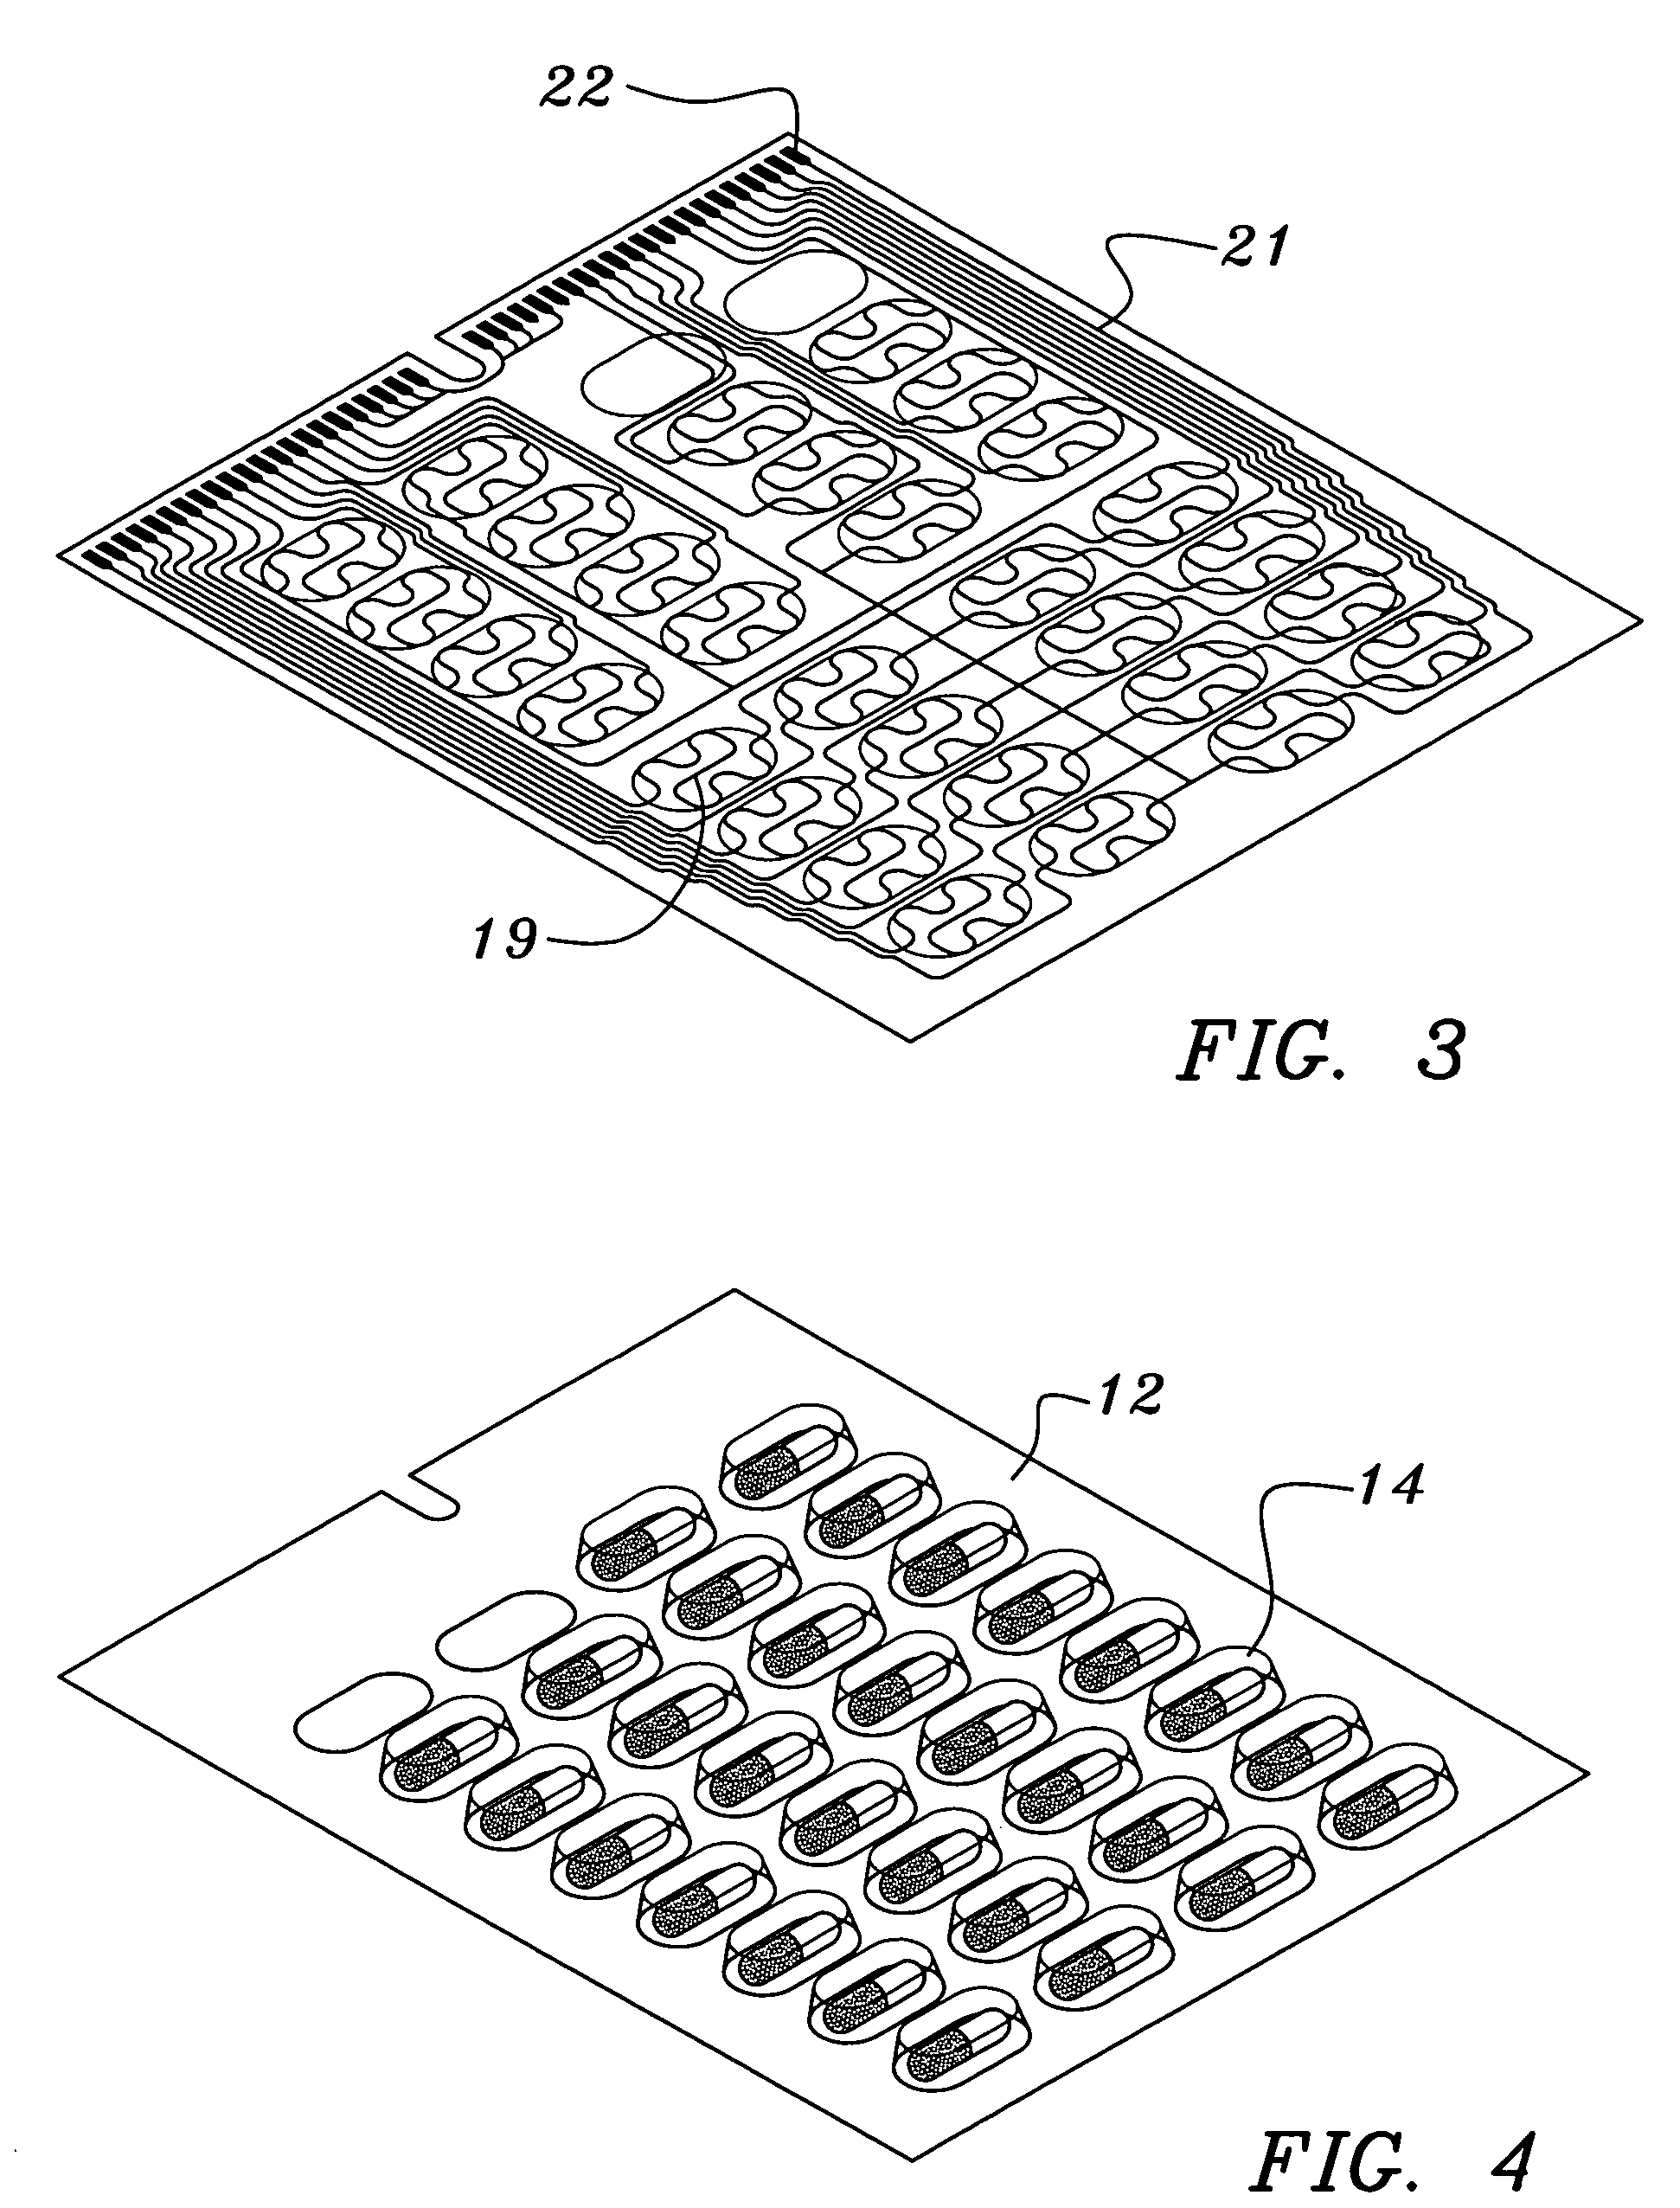 Systems and methods for storing and dispensing medication